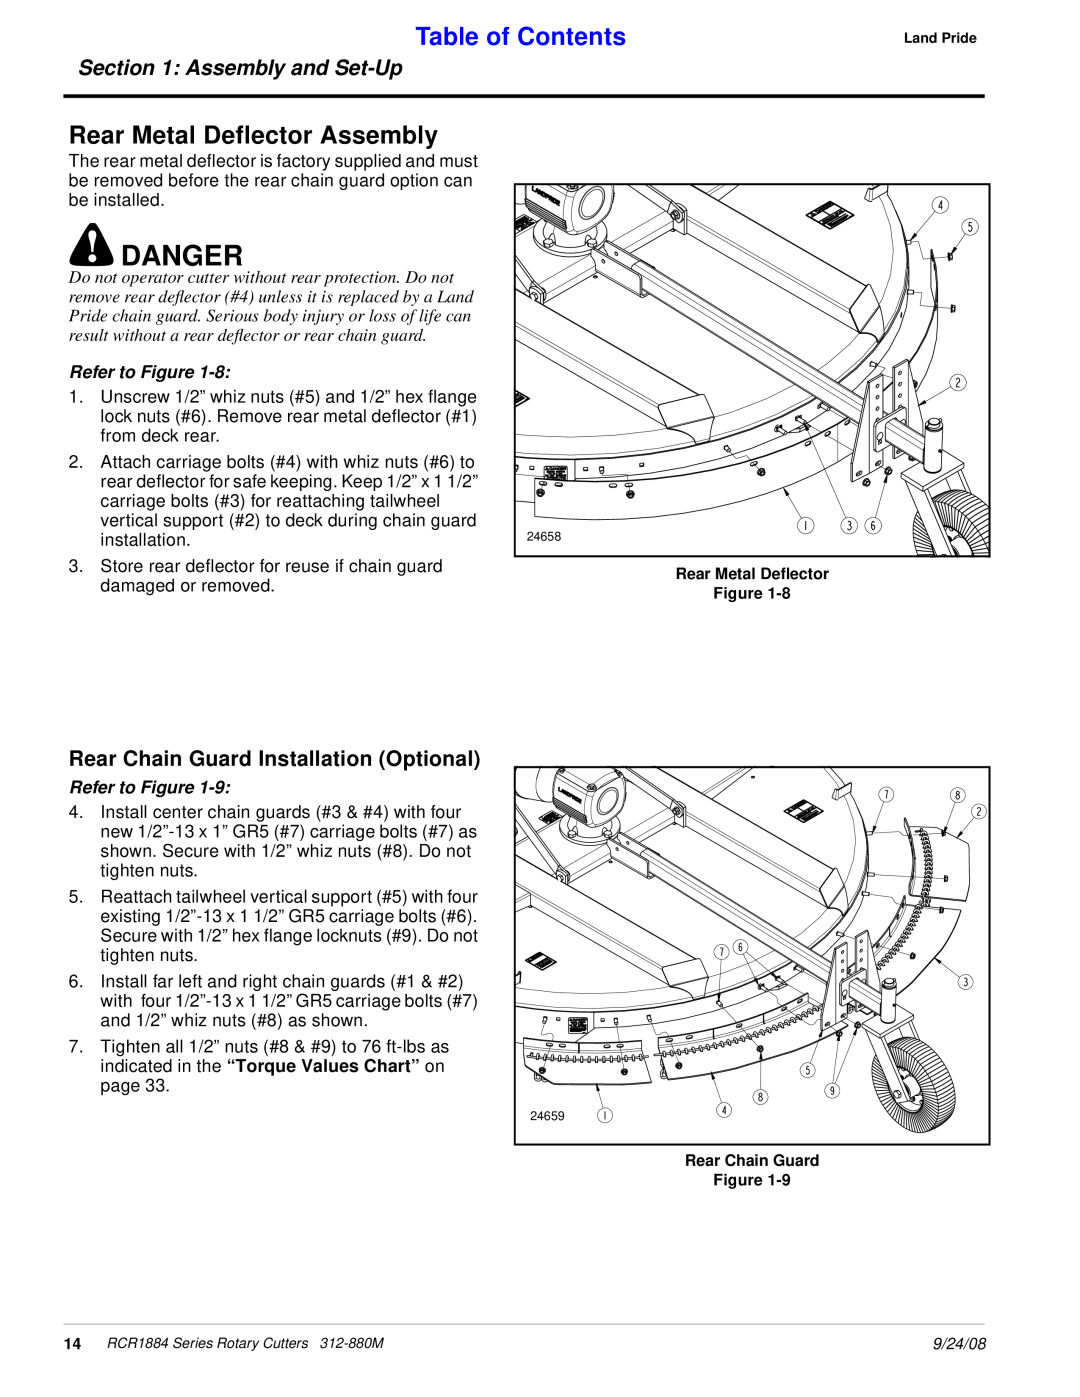 Land Pride RCR1884 manual Danger, Rear Metal Deflector Assembly, Table of Contents, Assembly and Set-Up, Refer to Figure 